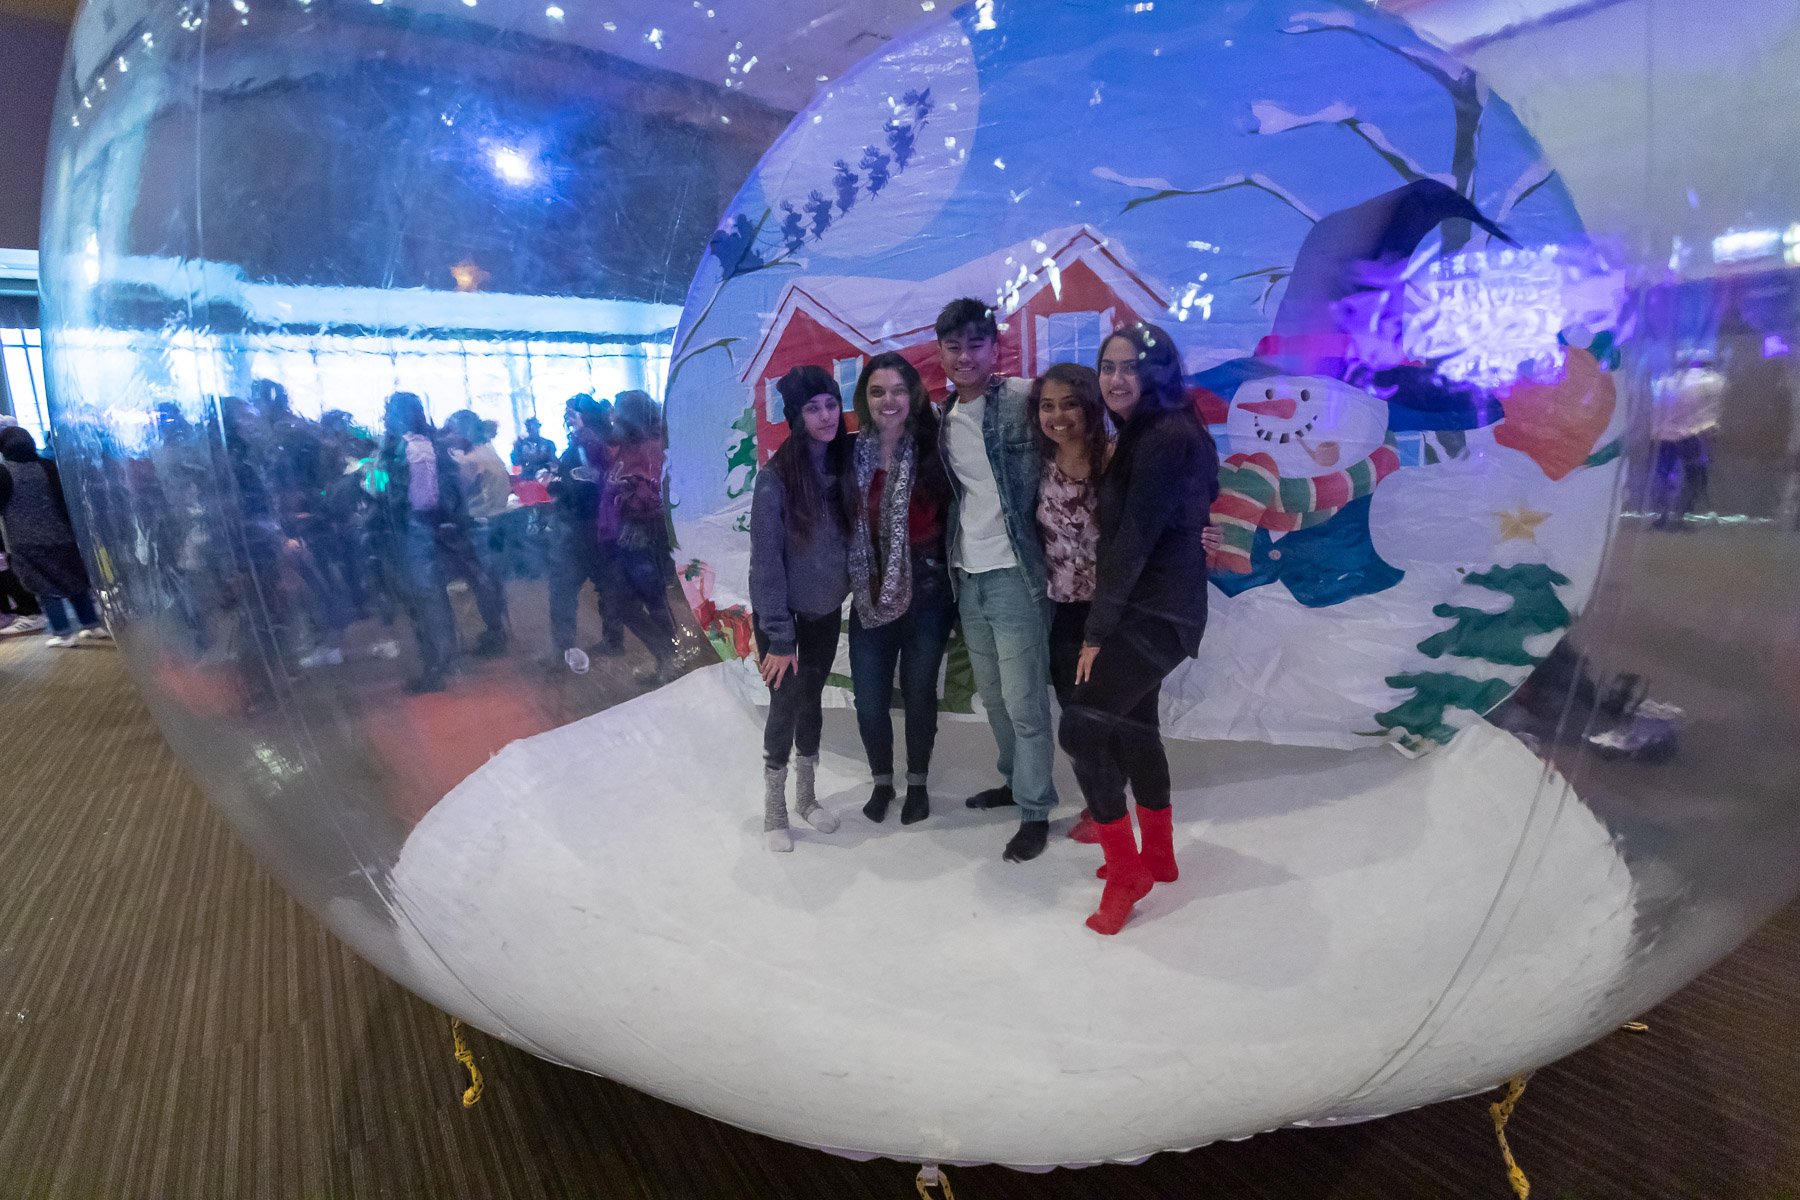 Students take pictures inside an inflatable snow globe before heading out to the Tree Lighting Ceremony. (DePaul University/Jeff Carrion)